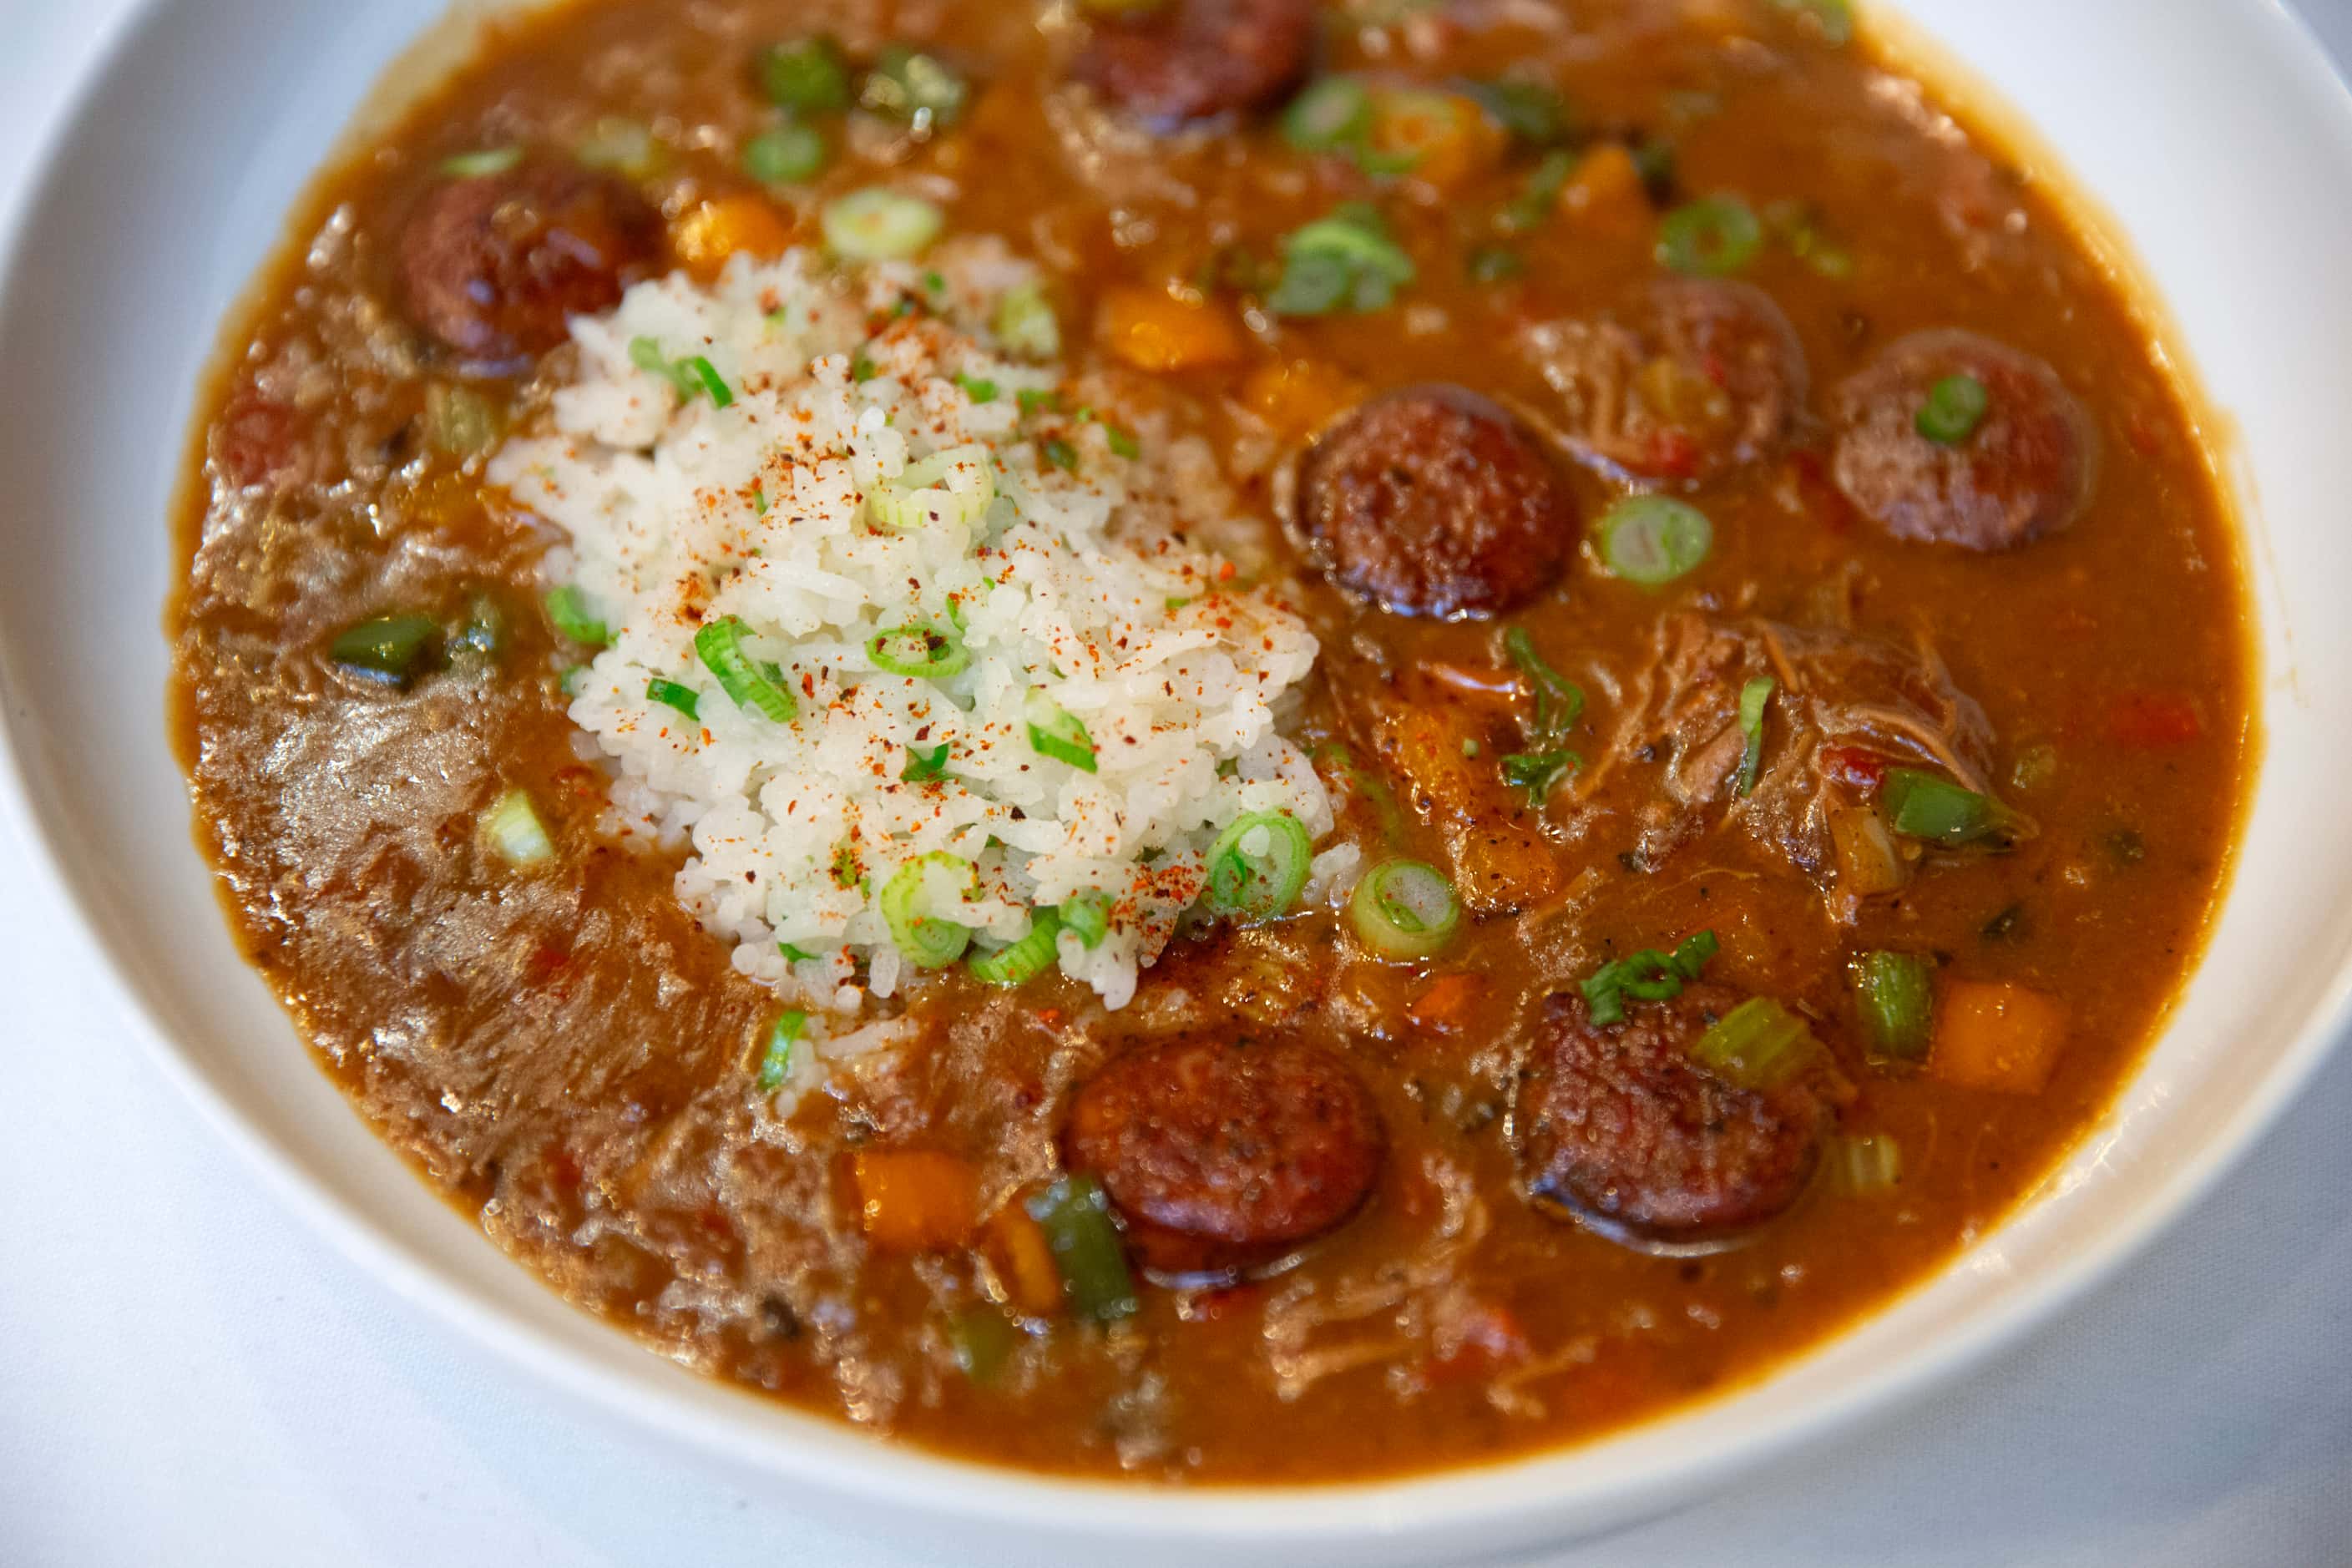 Chef Jeramie's Gumbo is named for executive chef Jeramie Robison at Little Daisy in Dallas.